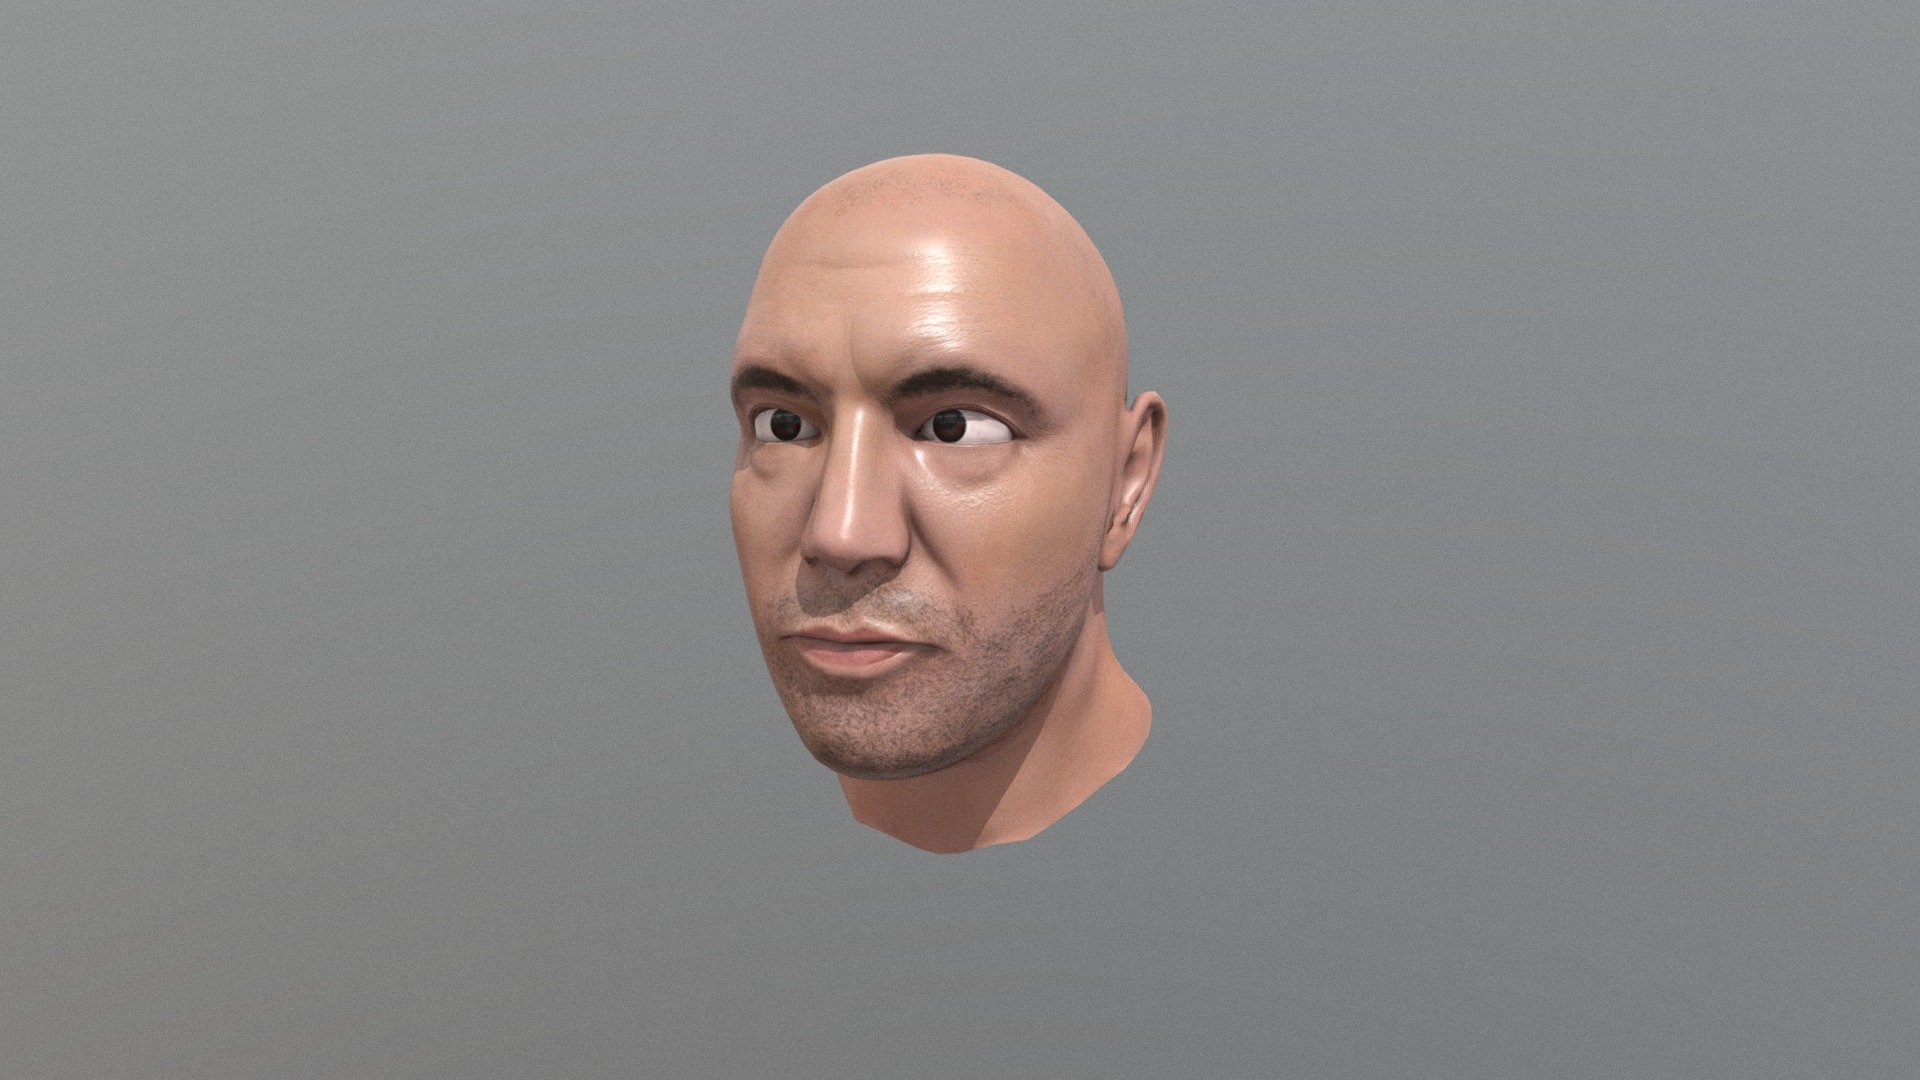 For a class we had to make a bust, I decided to listen to some podcasts and make a bust of Joe Rogan - Joe Rogan Bust - 3D model by BLMcHale 3d model